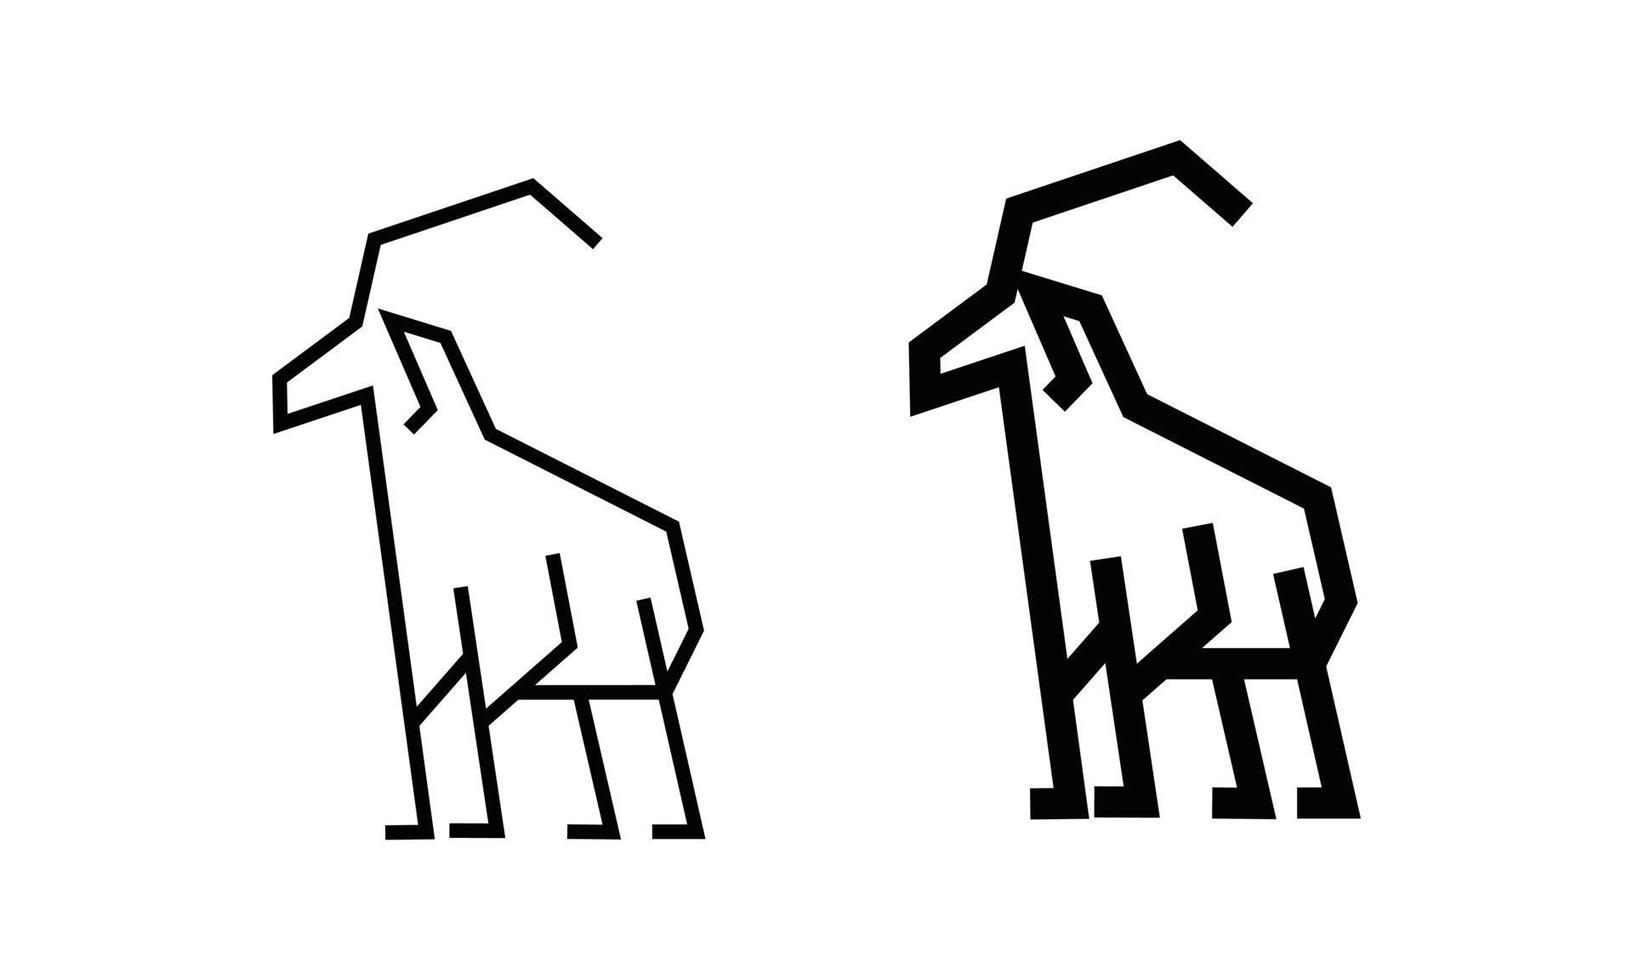 mountain goat line art vector illustration isolated on white background. minimal outline icon for simple animal logo concept.